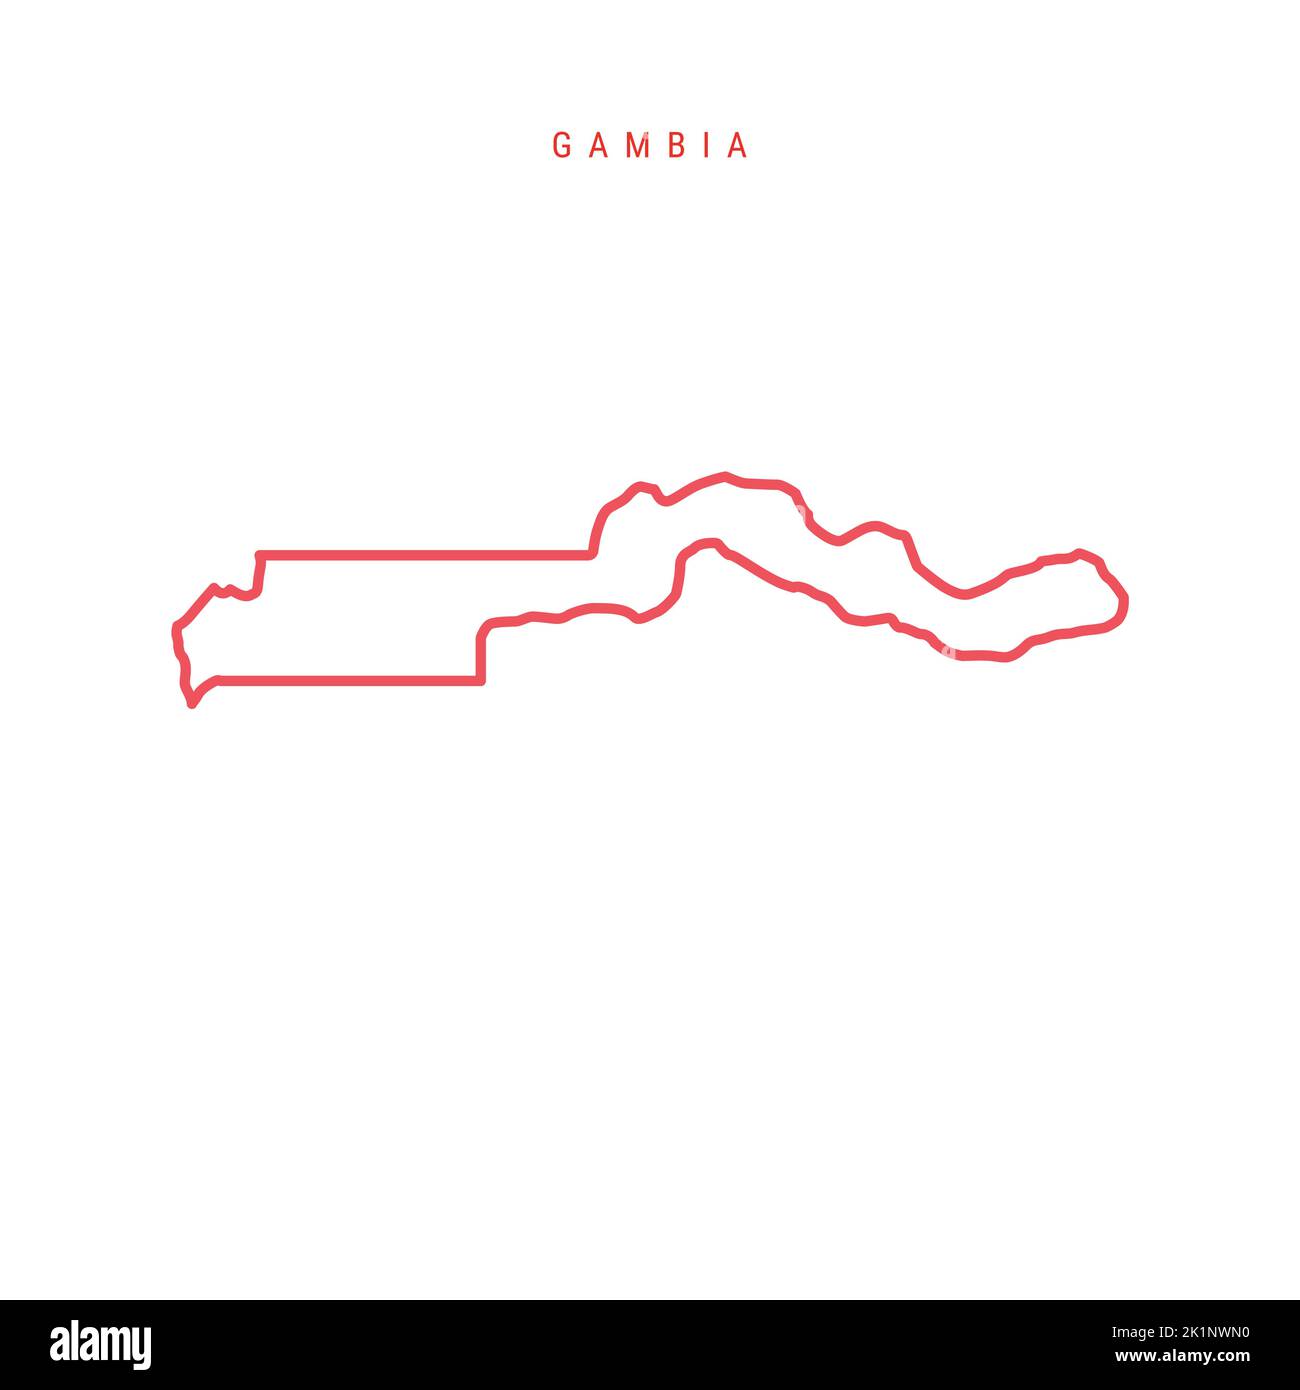 Gambia editable outline map. Gambian red border. Country name. Adjust line weight. Change to any color. Vector illustration. Stock Vector